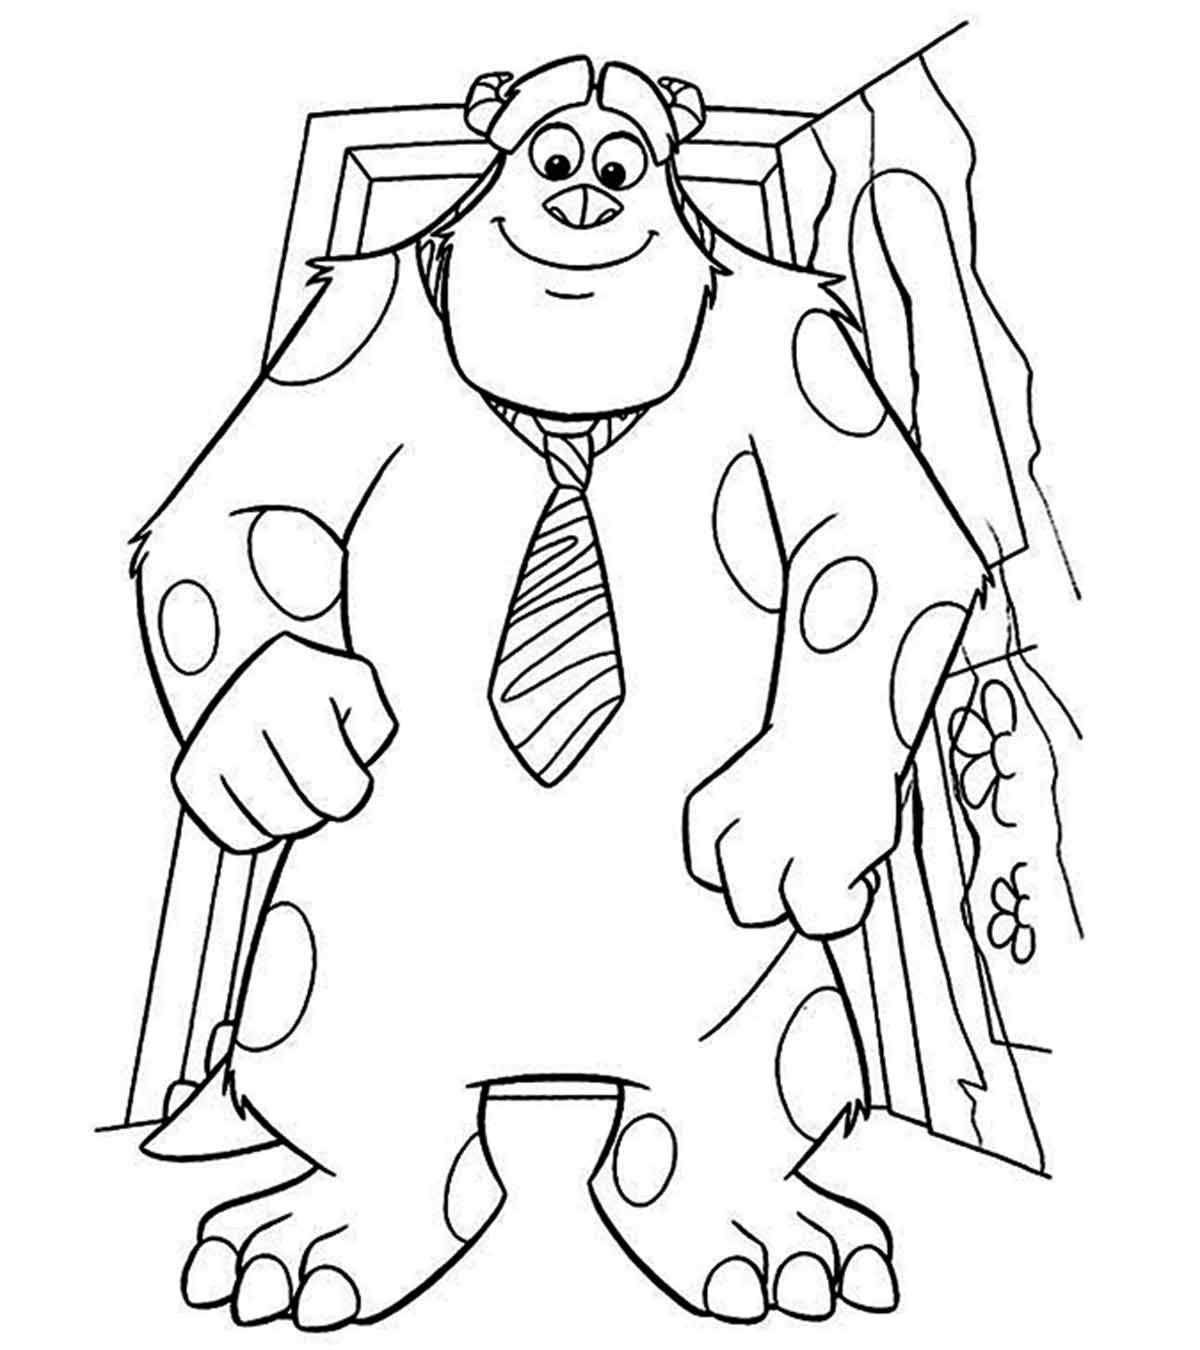 Free Printable Monster Inc Coloring Pages Pdf - Sully Monsters Inc Coloring Pages